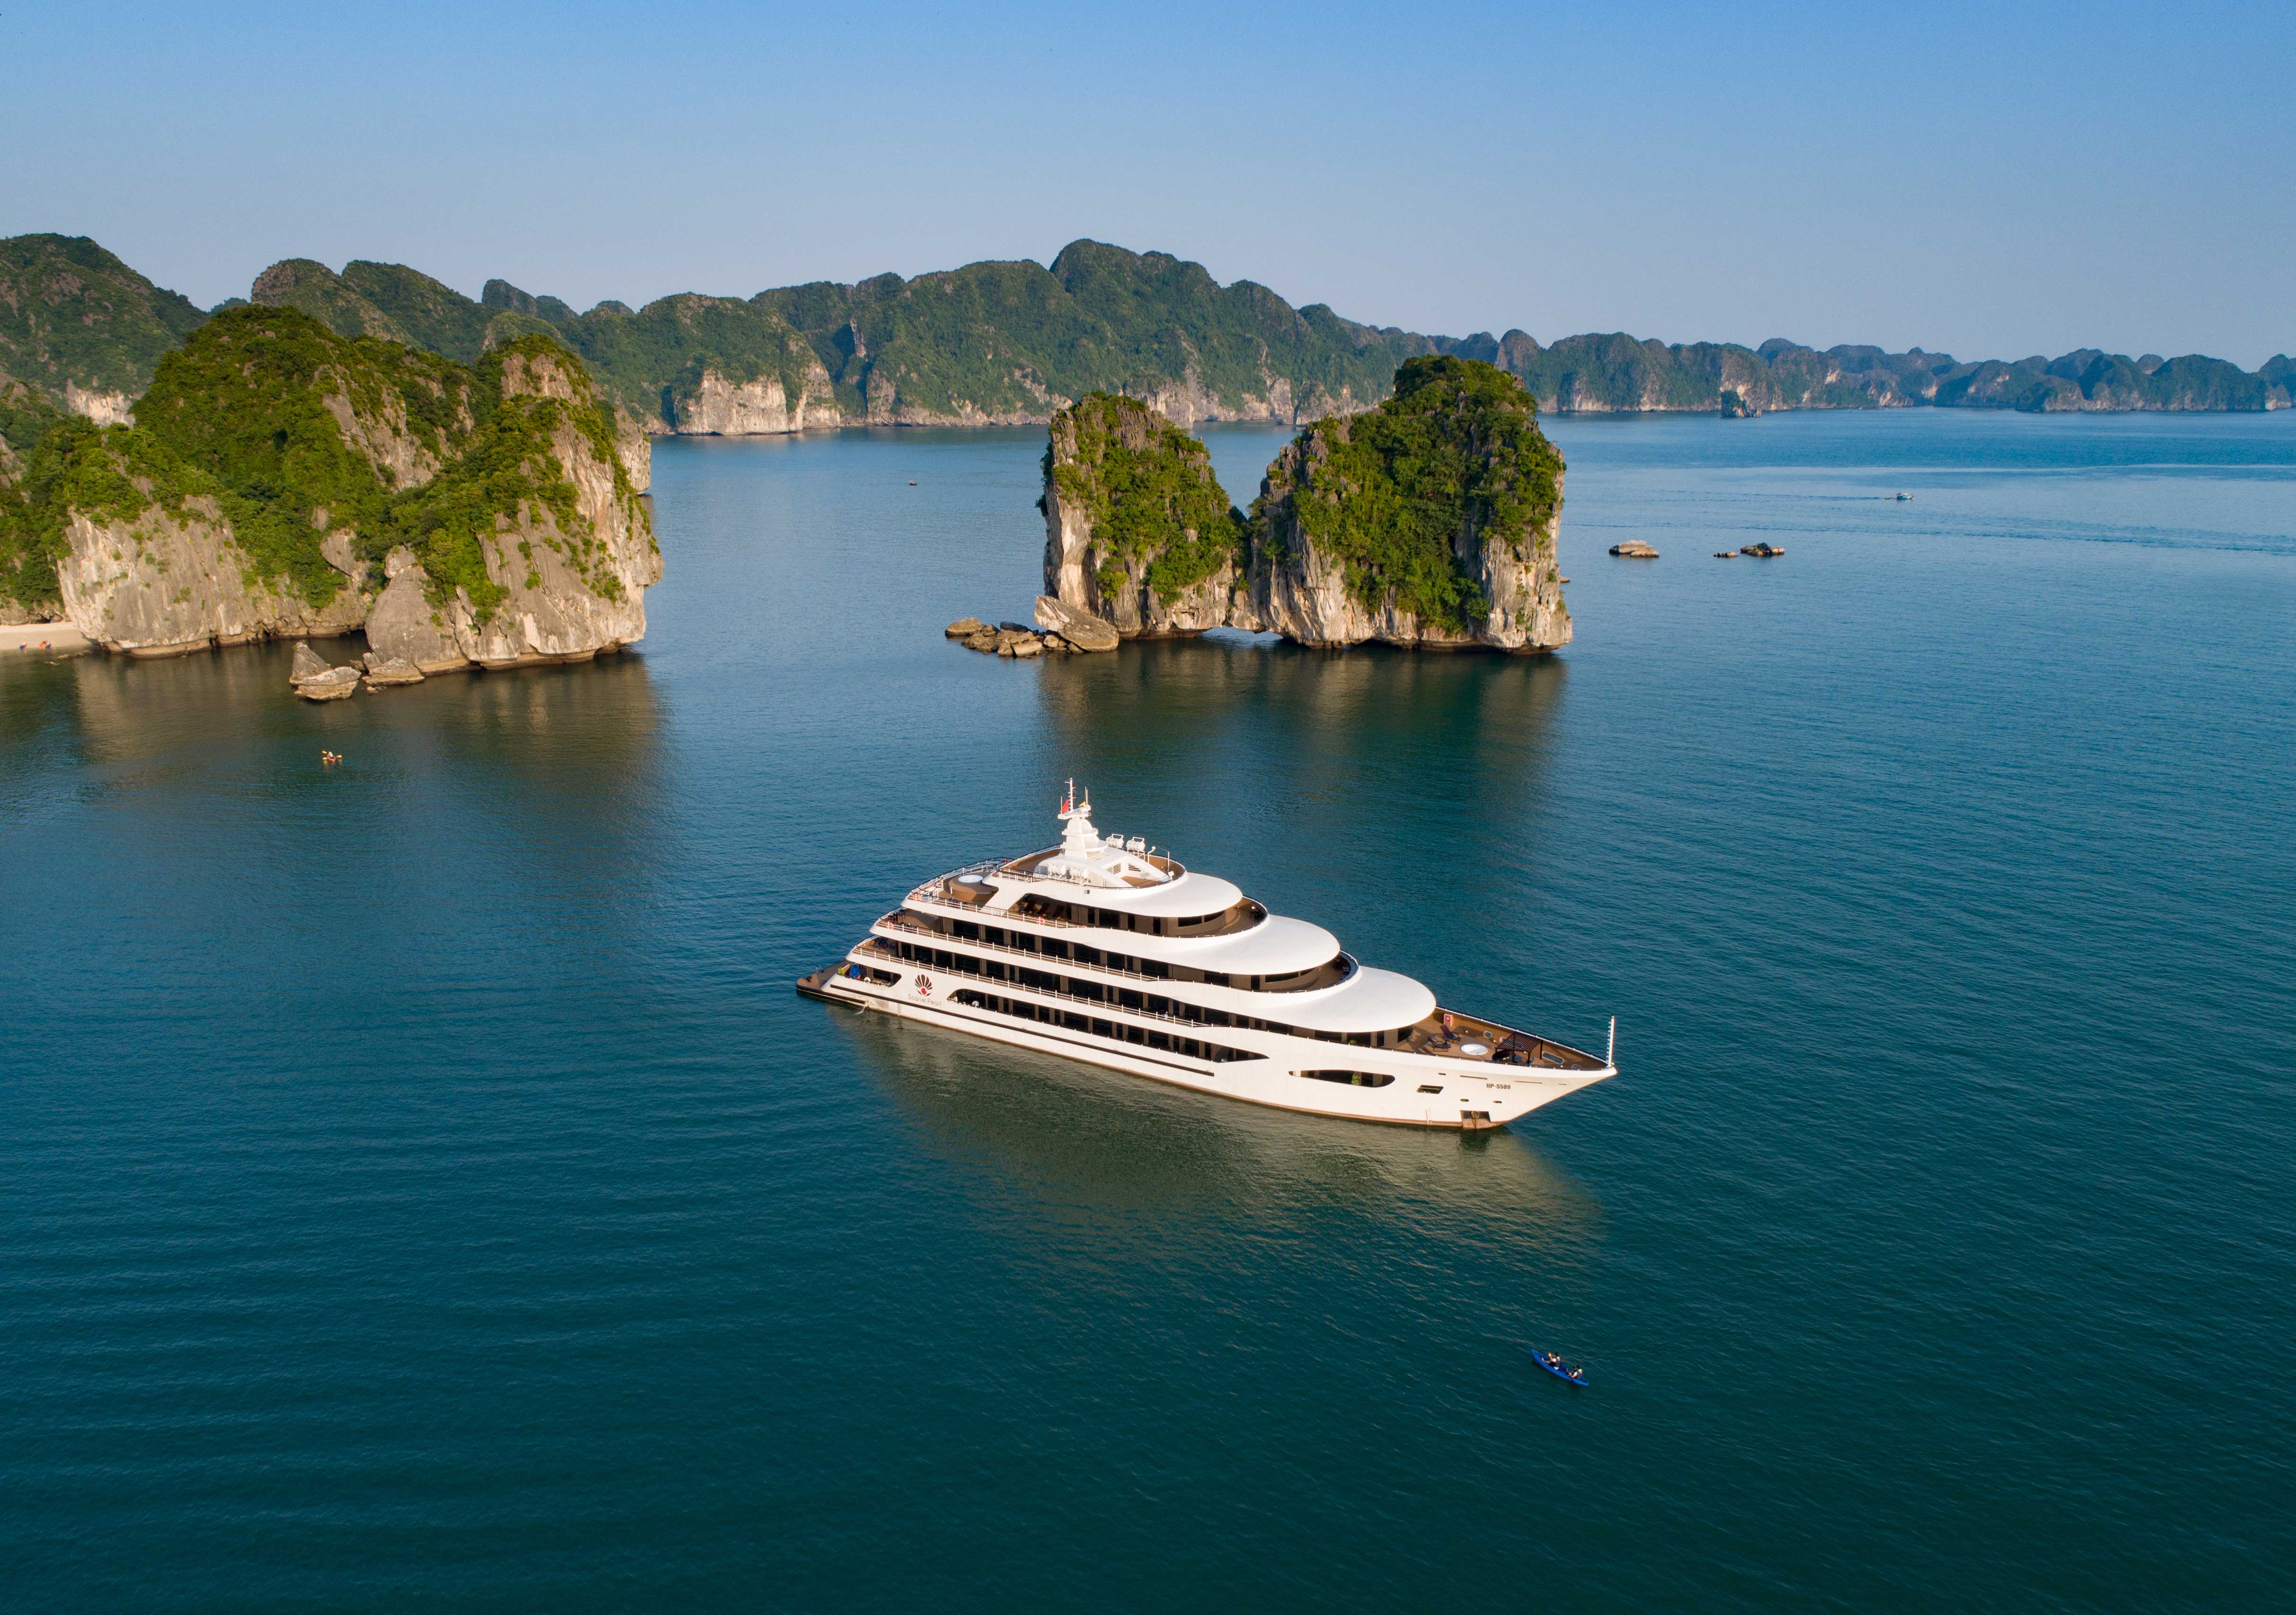 The fancier boats tend to go to Halong Bay